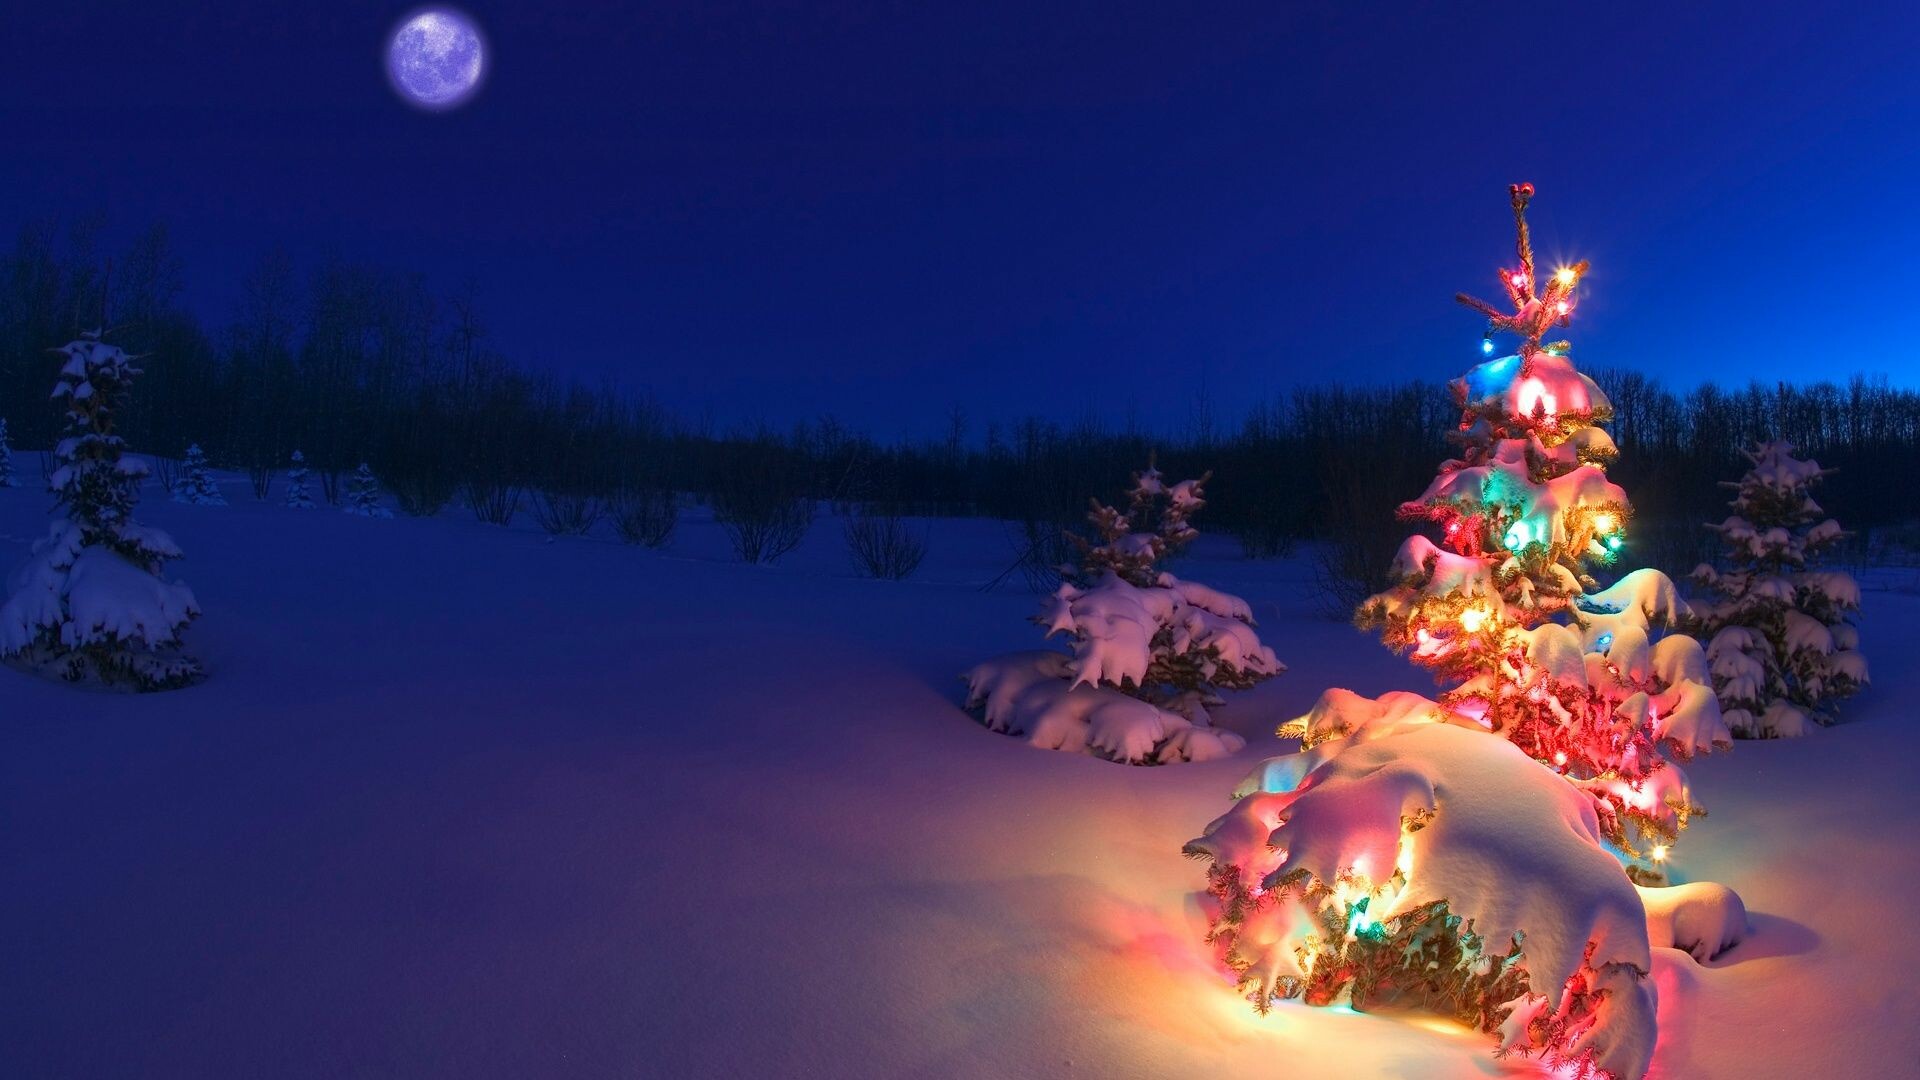 Fairy Lights: Colorful bulbs that are used decoratively, especially on Christmas trees. 1920x1080 Full HD Background.